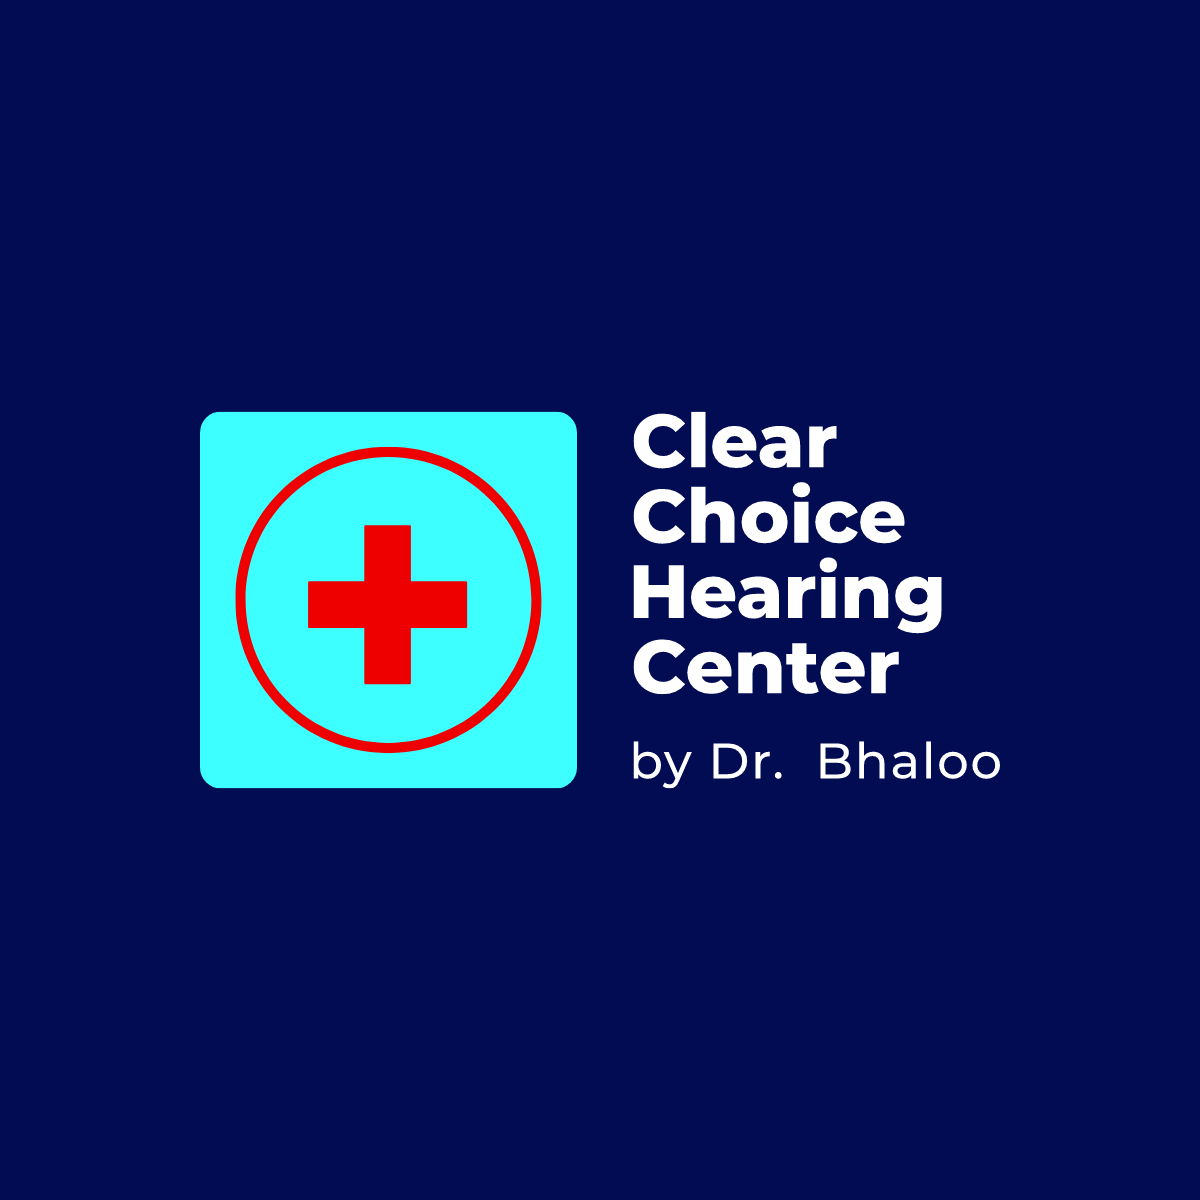 Clear Choice Hearing Center by Dr. Bhaloo